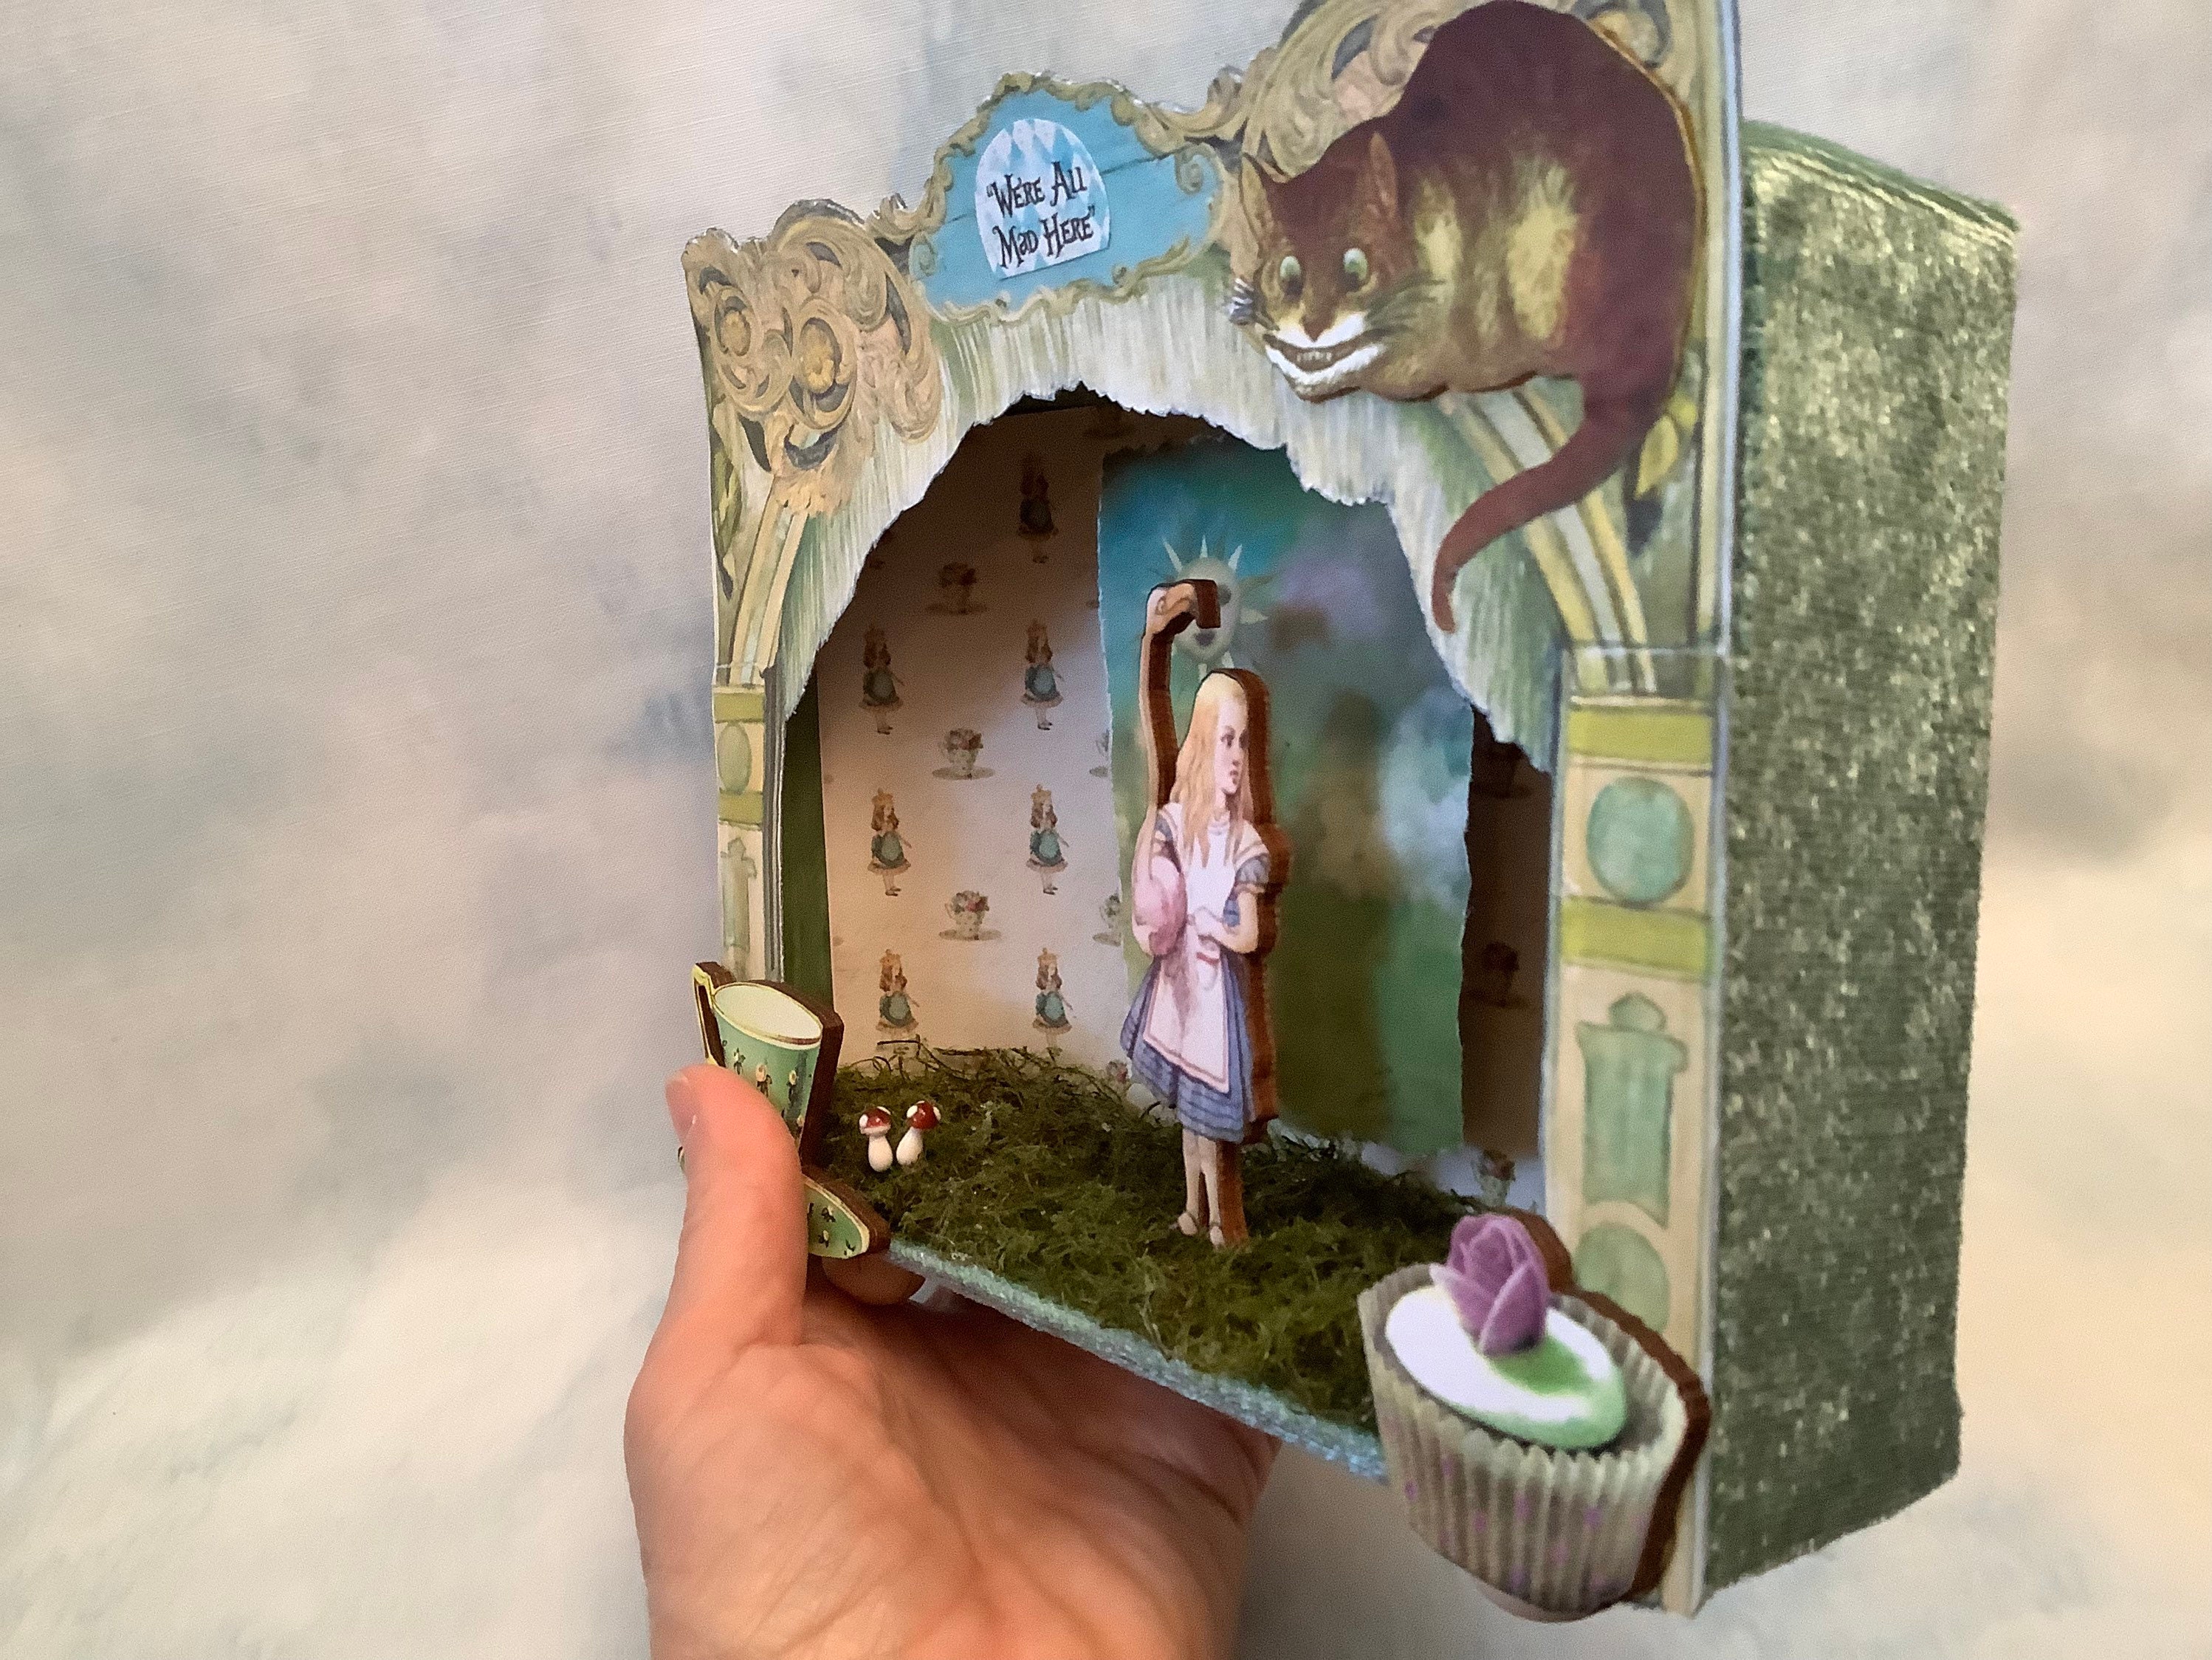 I made an Alice in Wonderland diorama out of 40291 Creative